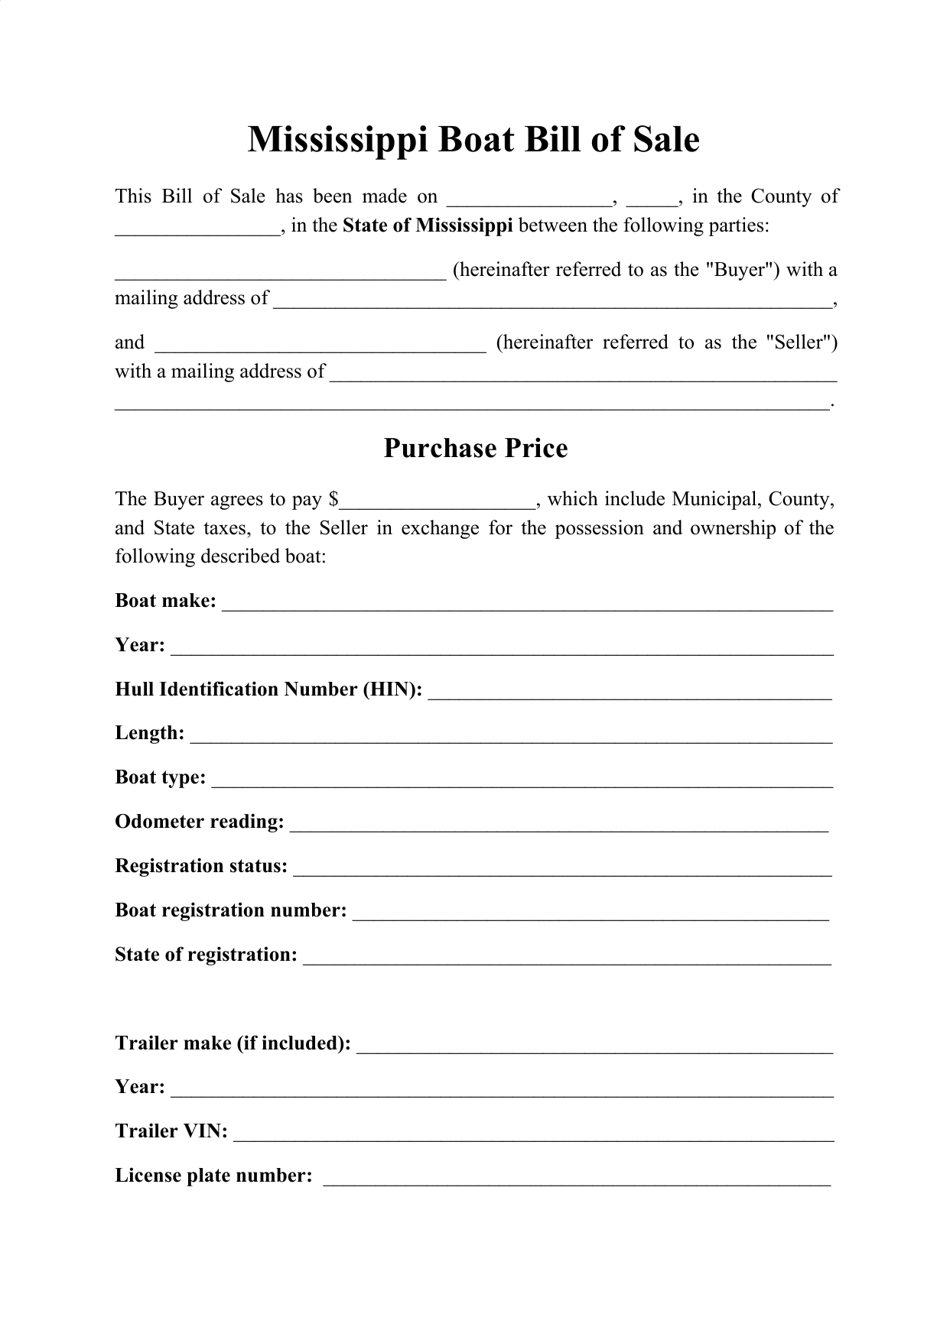 Boat Bill of Sale Form - Mississippi, Page 1